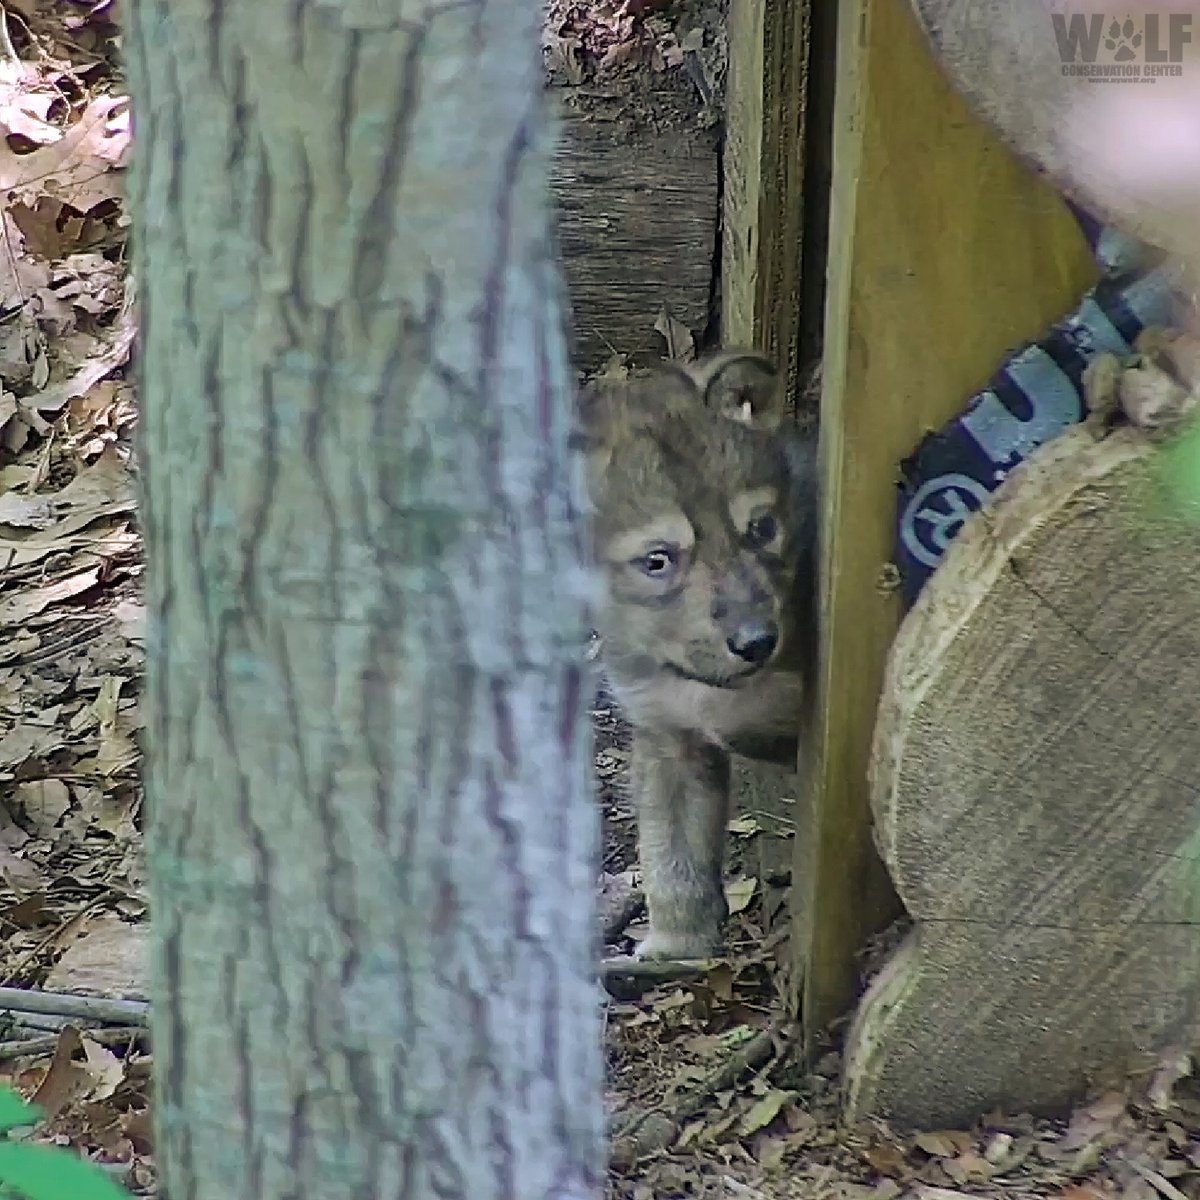 #PupDate! 🐾🐺
Trumpet's 26-day-old Mexican gray wolf pup can't resist teetering around on new legs to explore outside his den. His blue eyes, wide open now, take in the world with curiosity. Every day brings new wonders - what discoveries will the little adventurer make today?